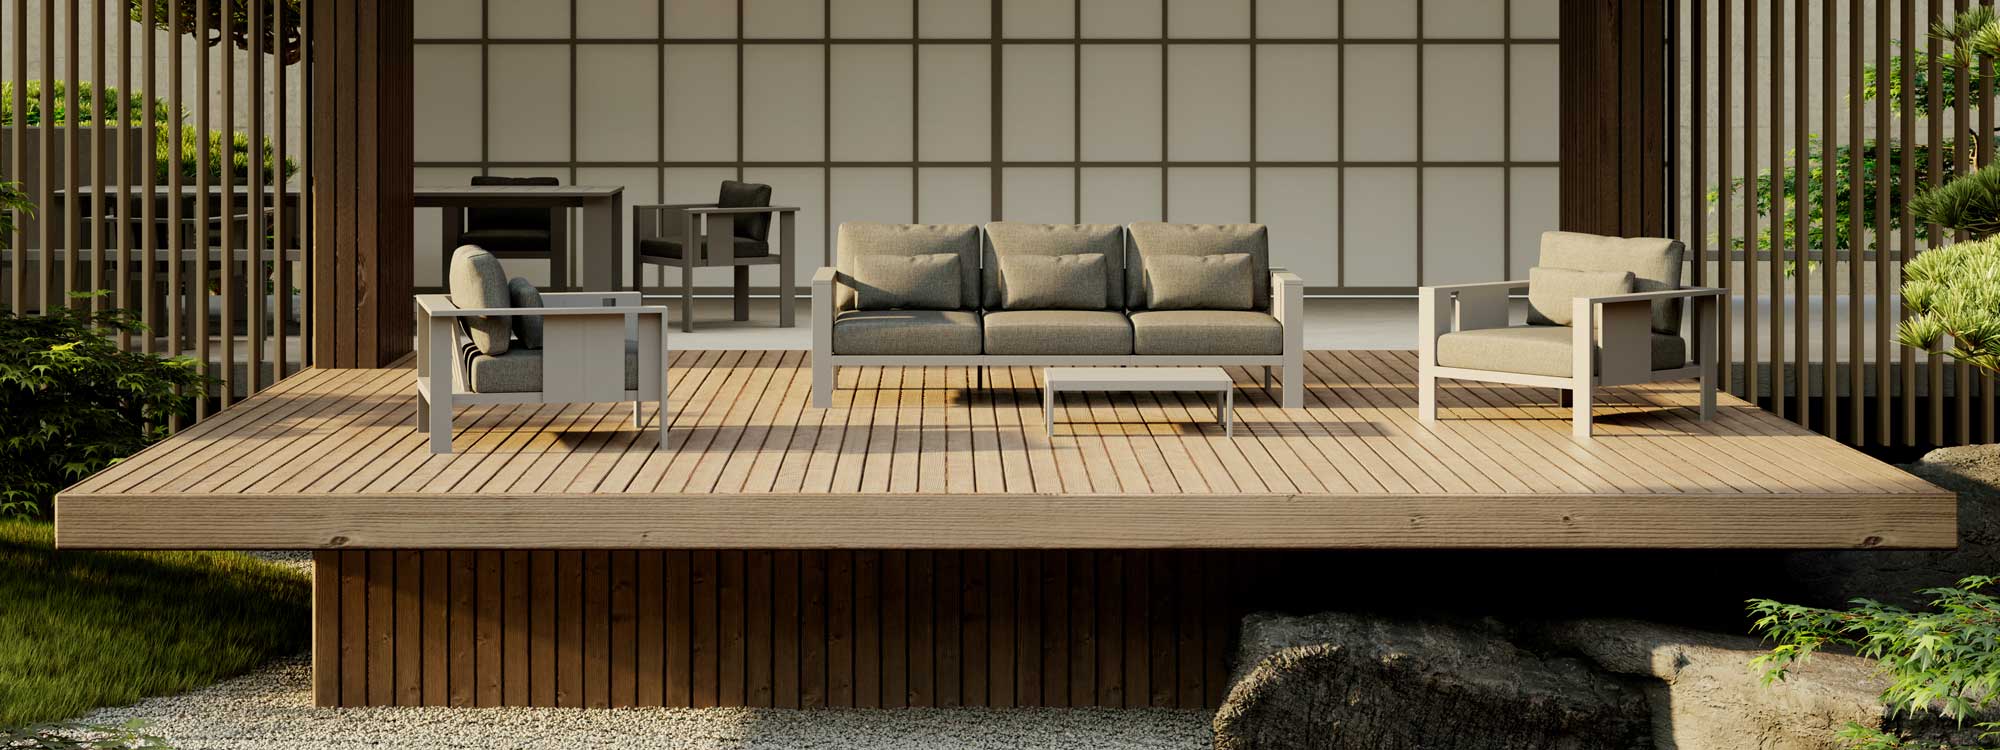 Image of Oiside Beam architectural garden sofa and lounge chairs by Francesc Rifé, shown on raised wooden deck with traditional Japanese wooden structure and screens in background